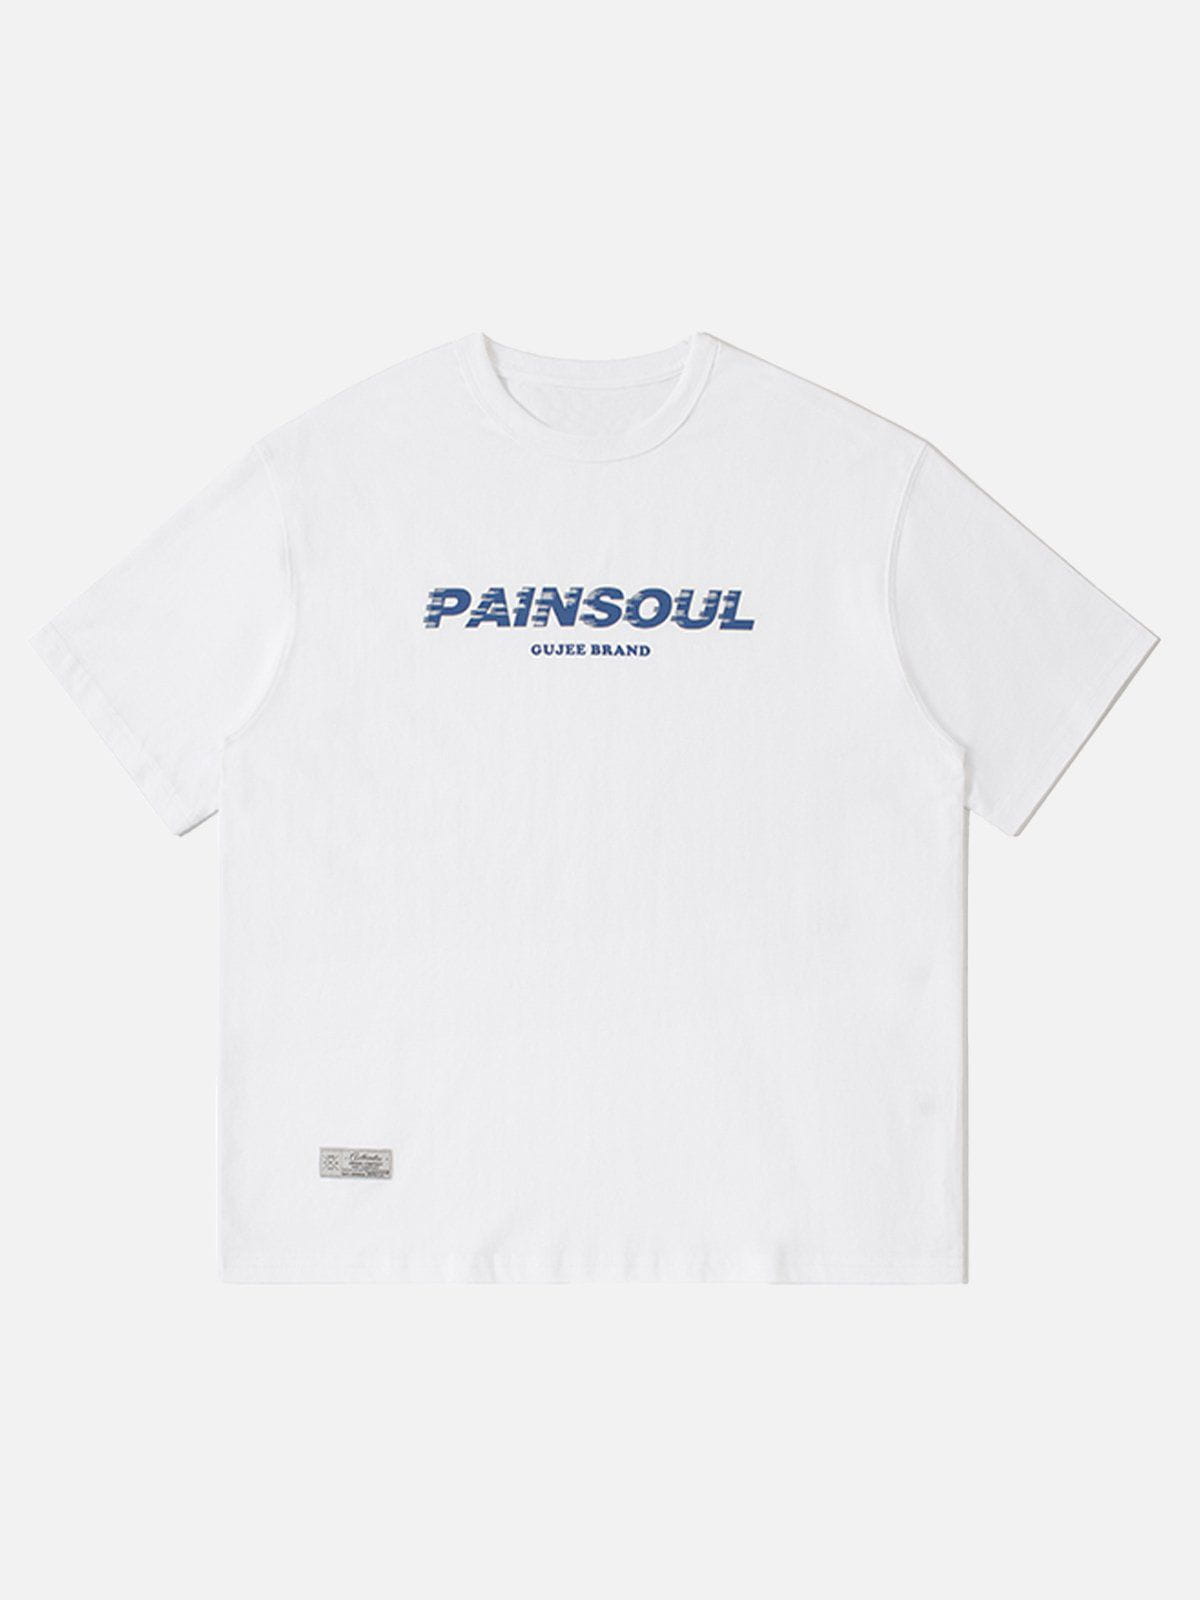 Sneakerland™ - PAINSOUL Print Cotton Tee